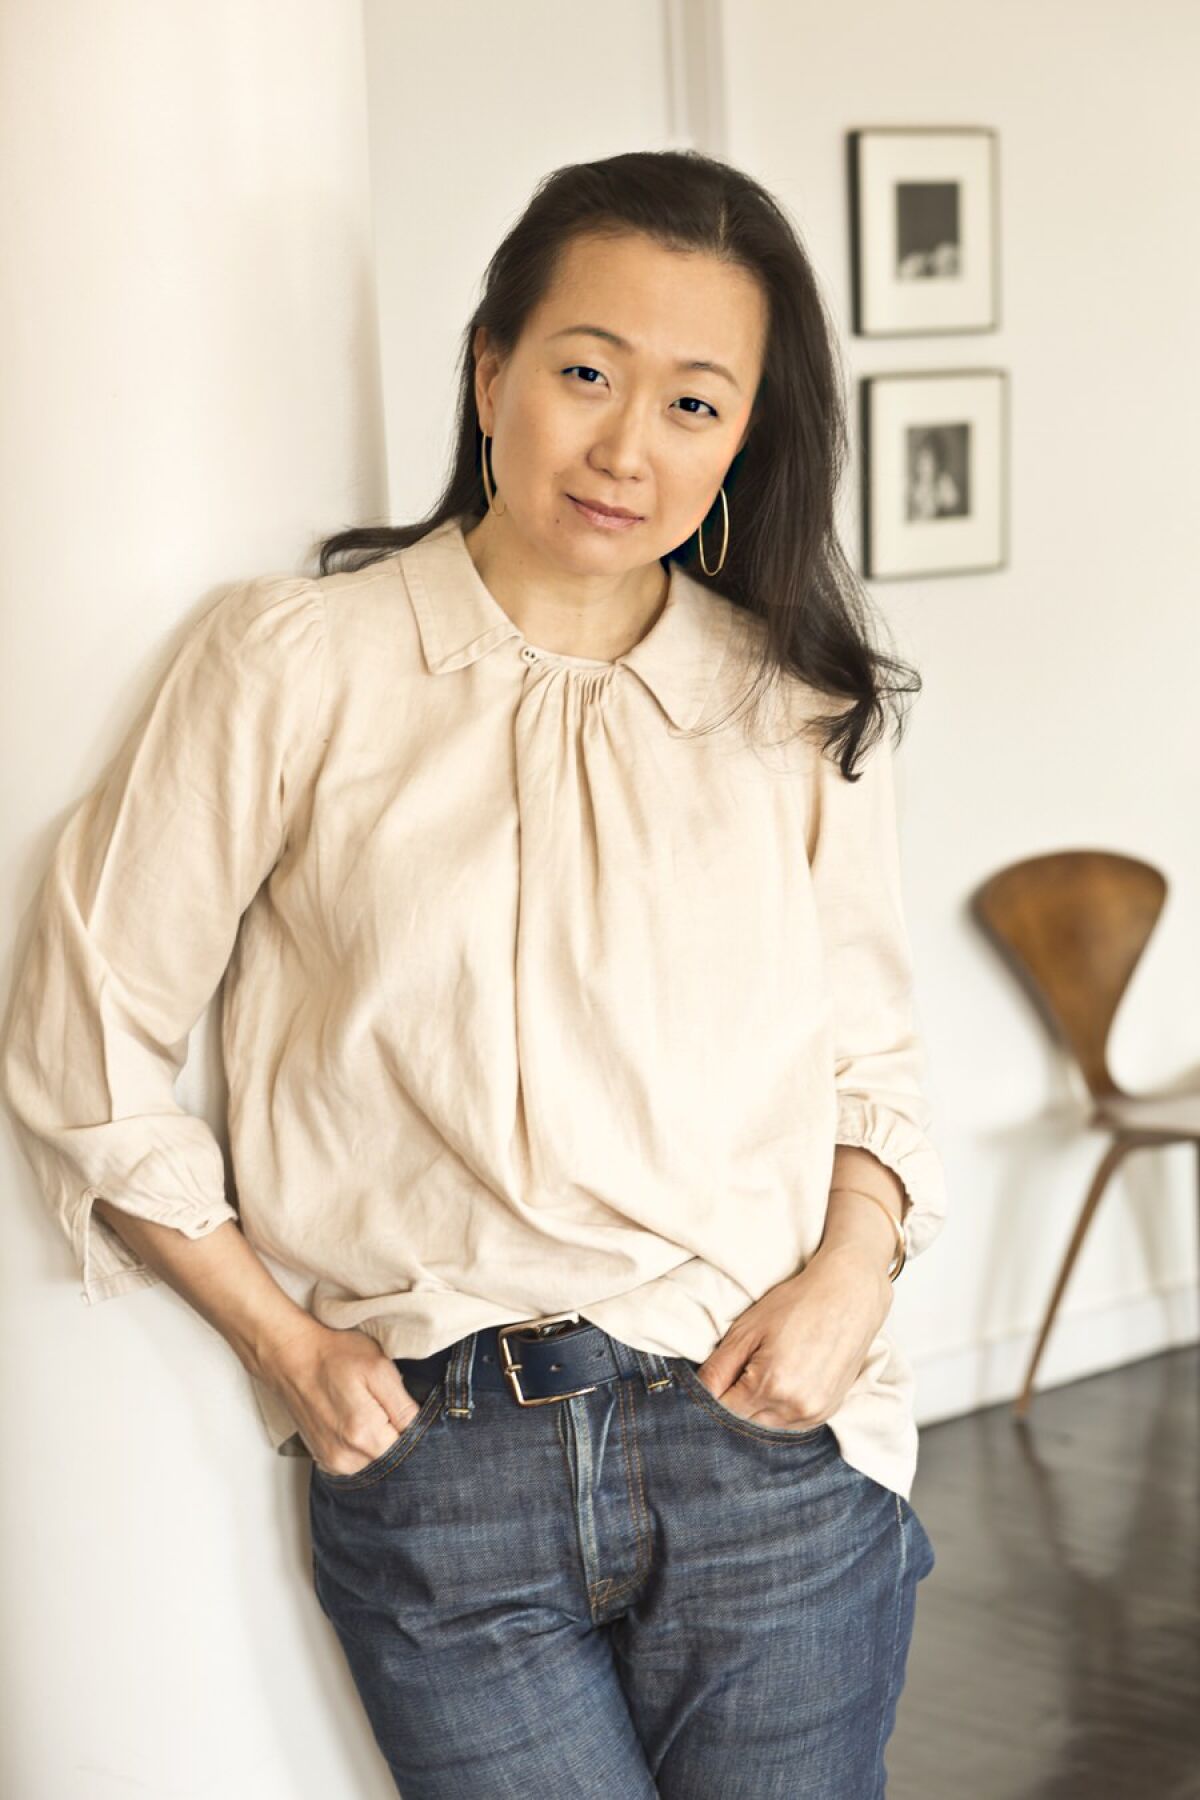 A woman leaning against a wall with her hands in her pants pockets